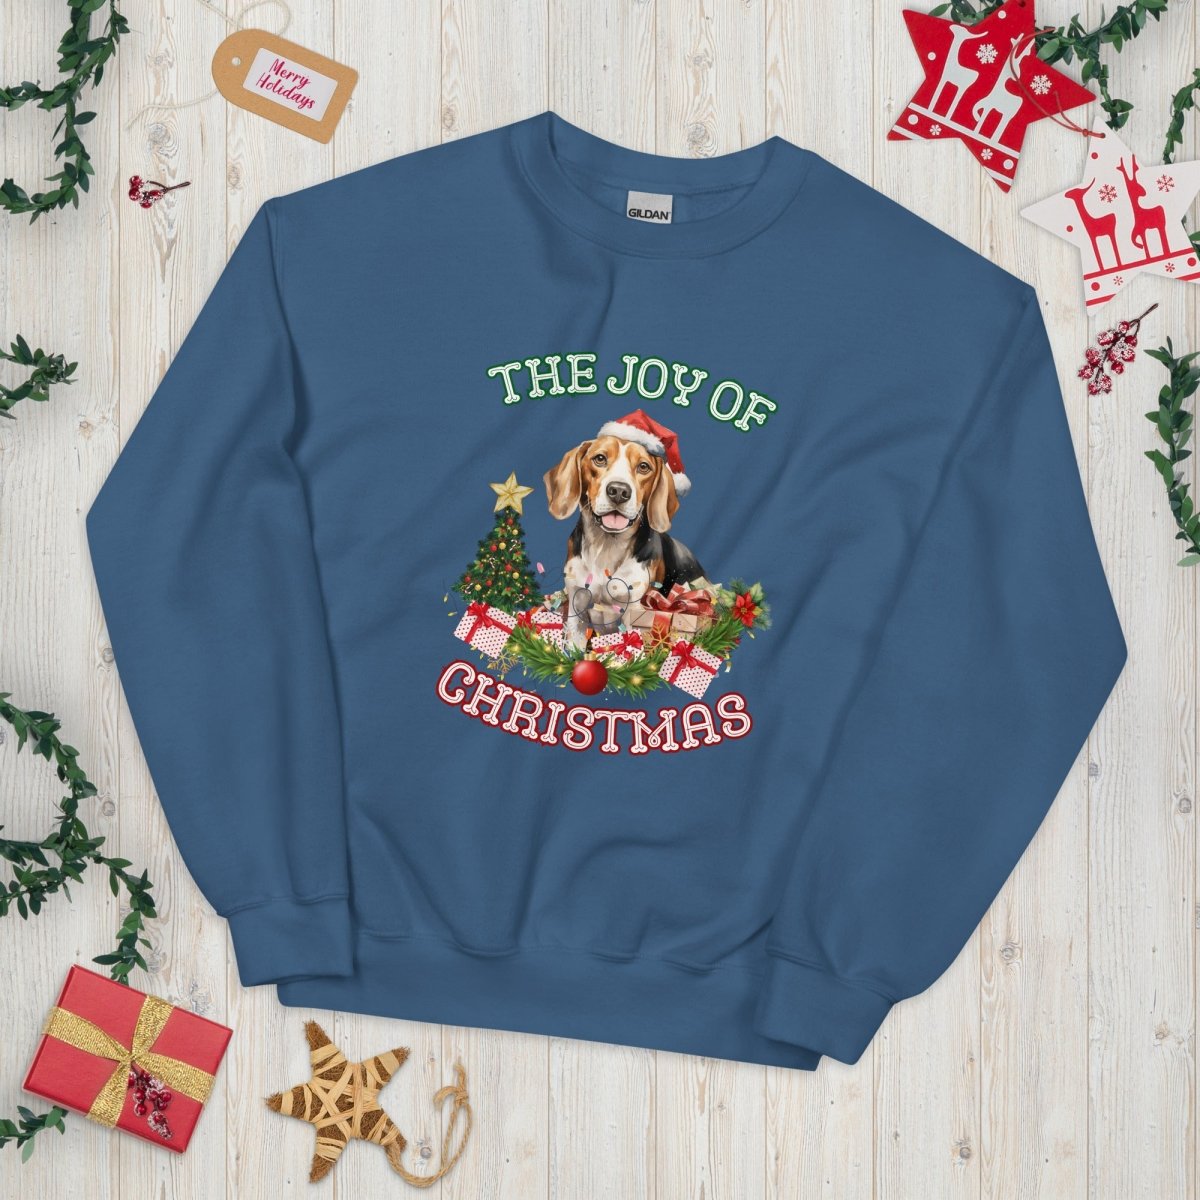 Christmas Beagle Pullover - High Quality Festive Unisex Sweater, Gift for Beagle Owner, Gift for Doglovers, Cute Xmas Dog Sweatshirt - Everything Pixel